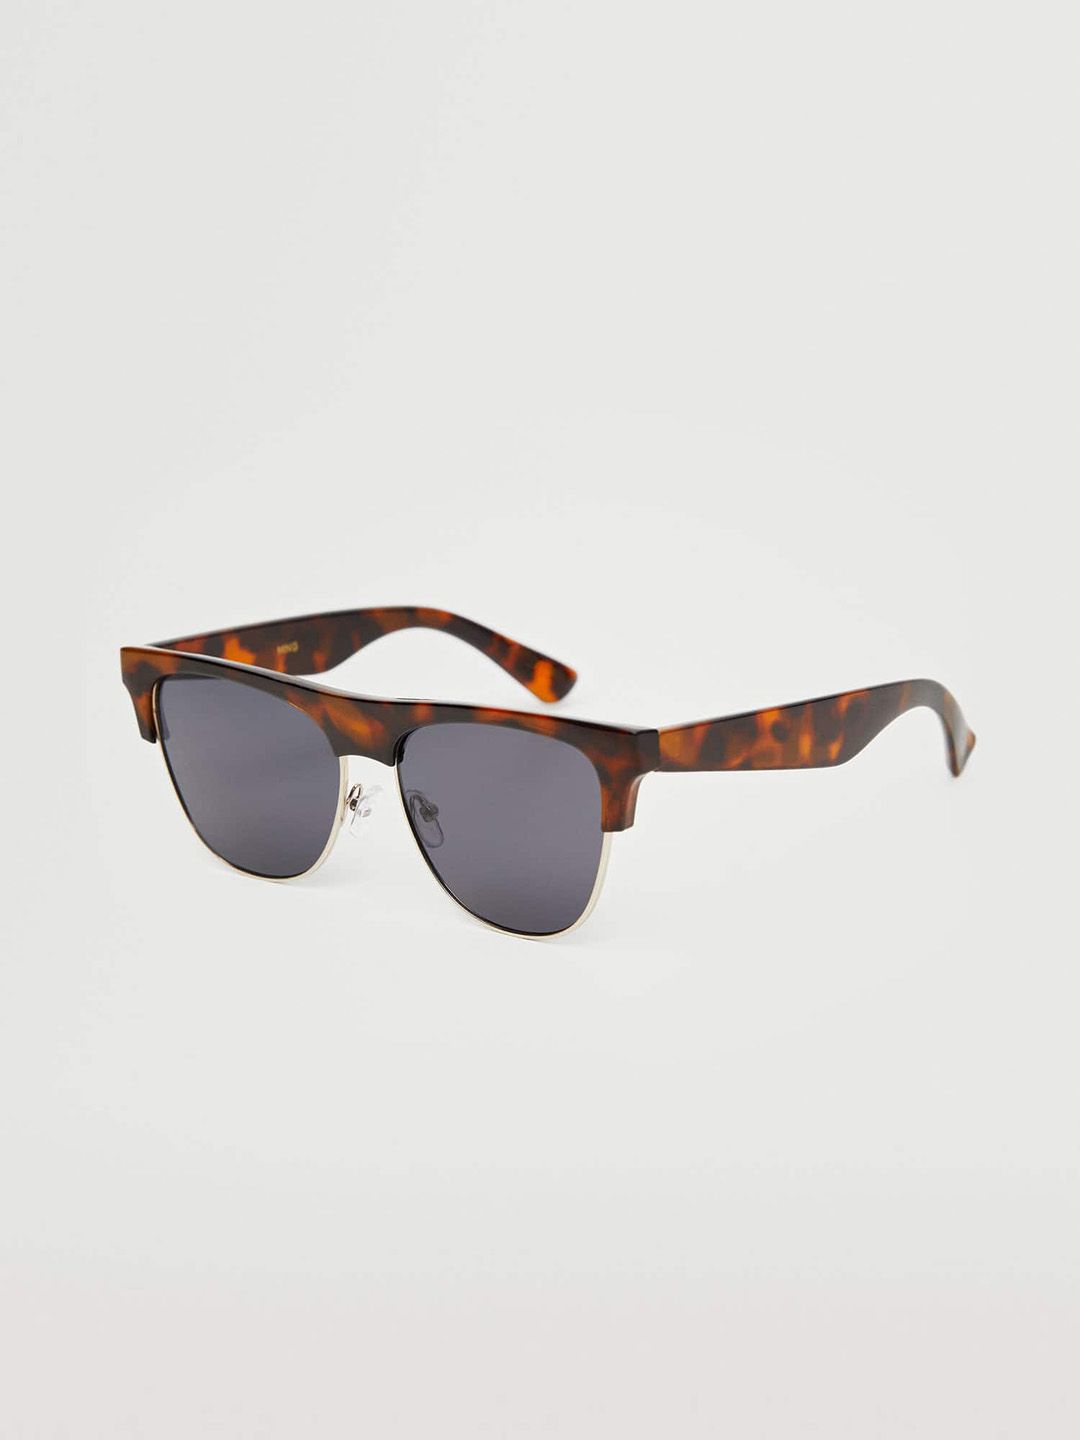 MANGO Women Grey Lens & Brown Browline Sunglasses with UV Protected Lens 27035767 Price in India